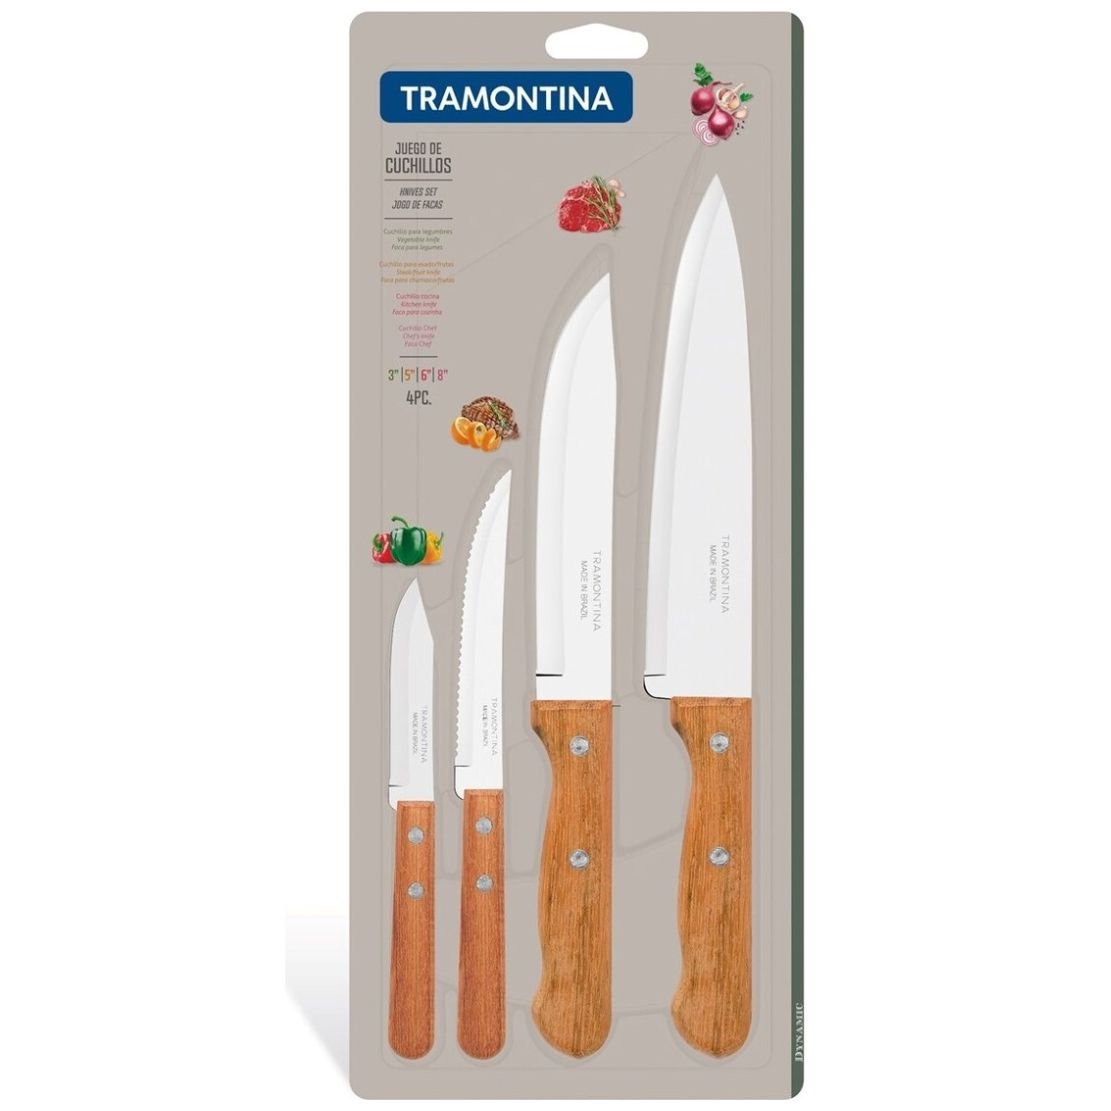 Tramontina Dynamic Juego de Cuchillos Stainless Steel Knives Set with  Wooden Handle (12 pc)